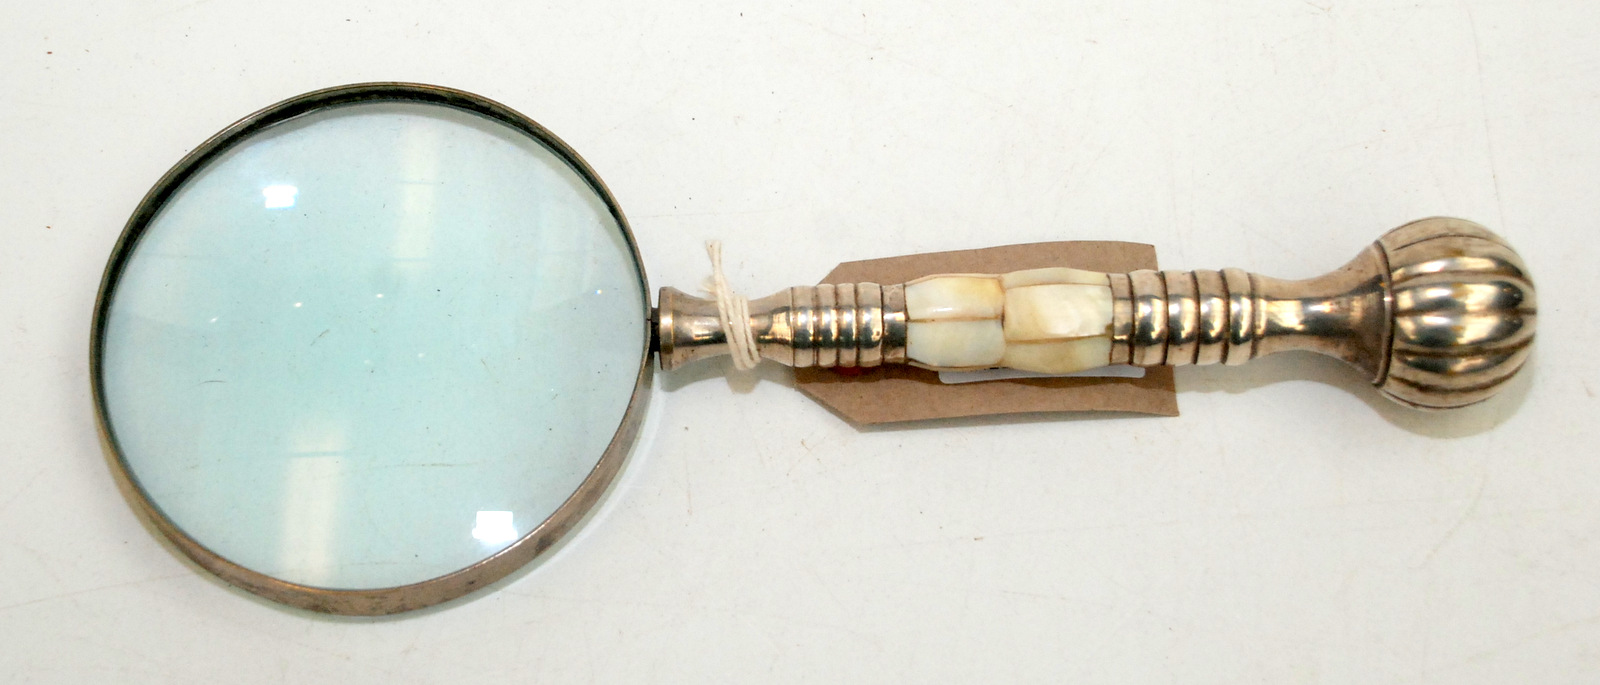 A silver plated mother of pearl mounted magnifying glass, full length 26cm. - Image 2 of 2